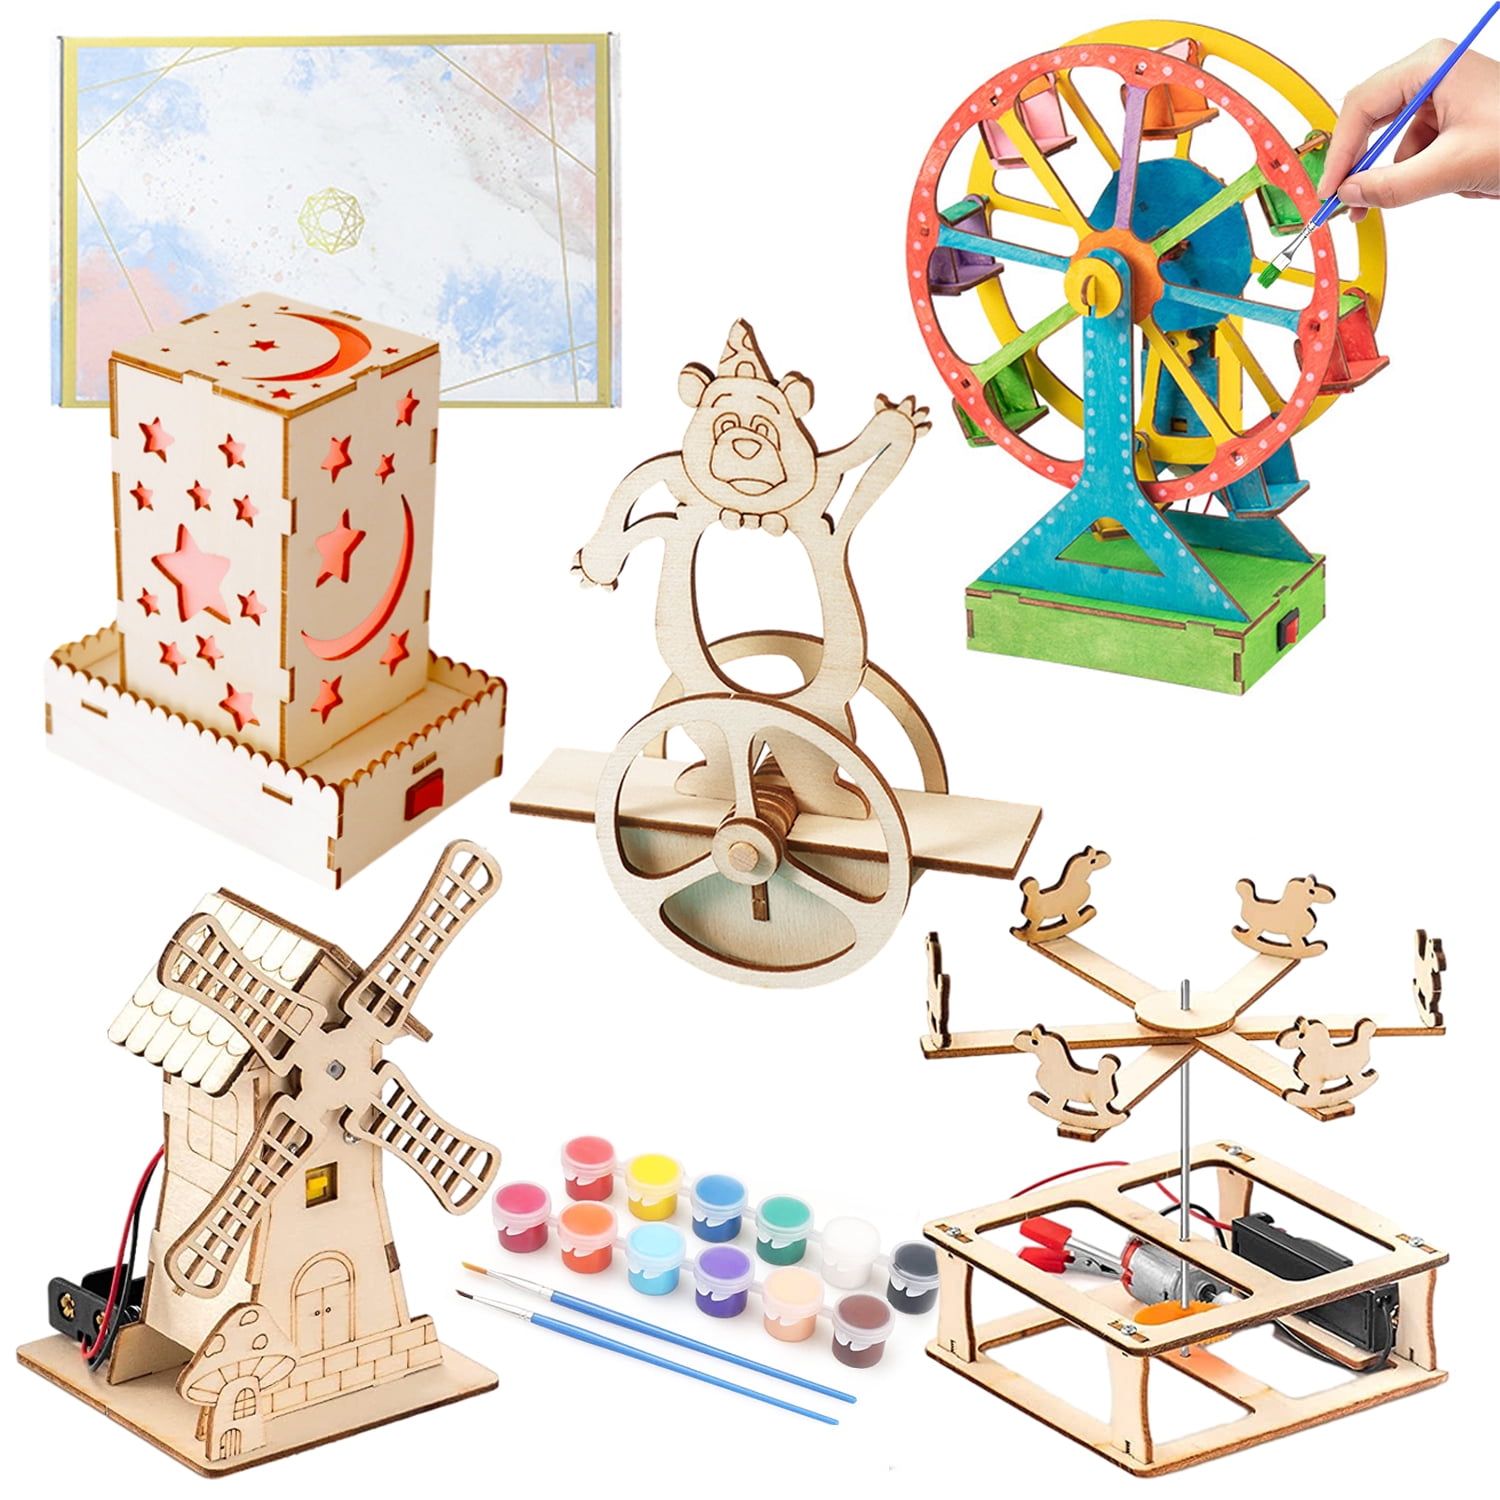 4 in 1 STEM Kits, STEM Projects for Kids Ages 8-12, 3D Wooden Puzzles, DIY  Educational Science Model Kits, Crafts Building Toys, Christmas Birthday